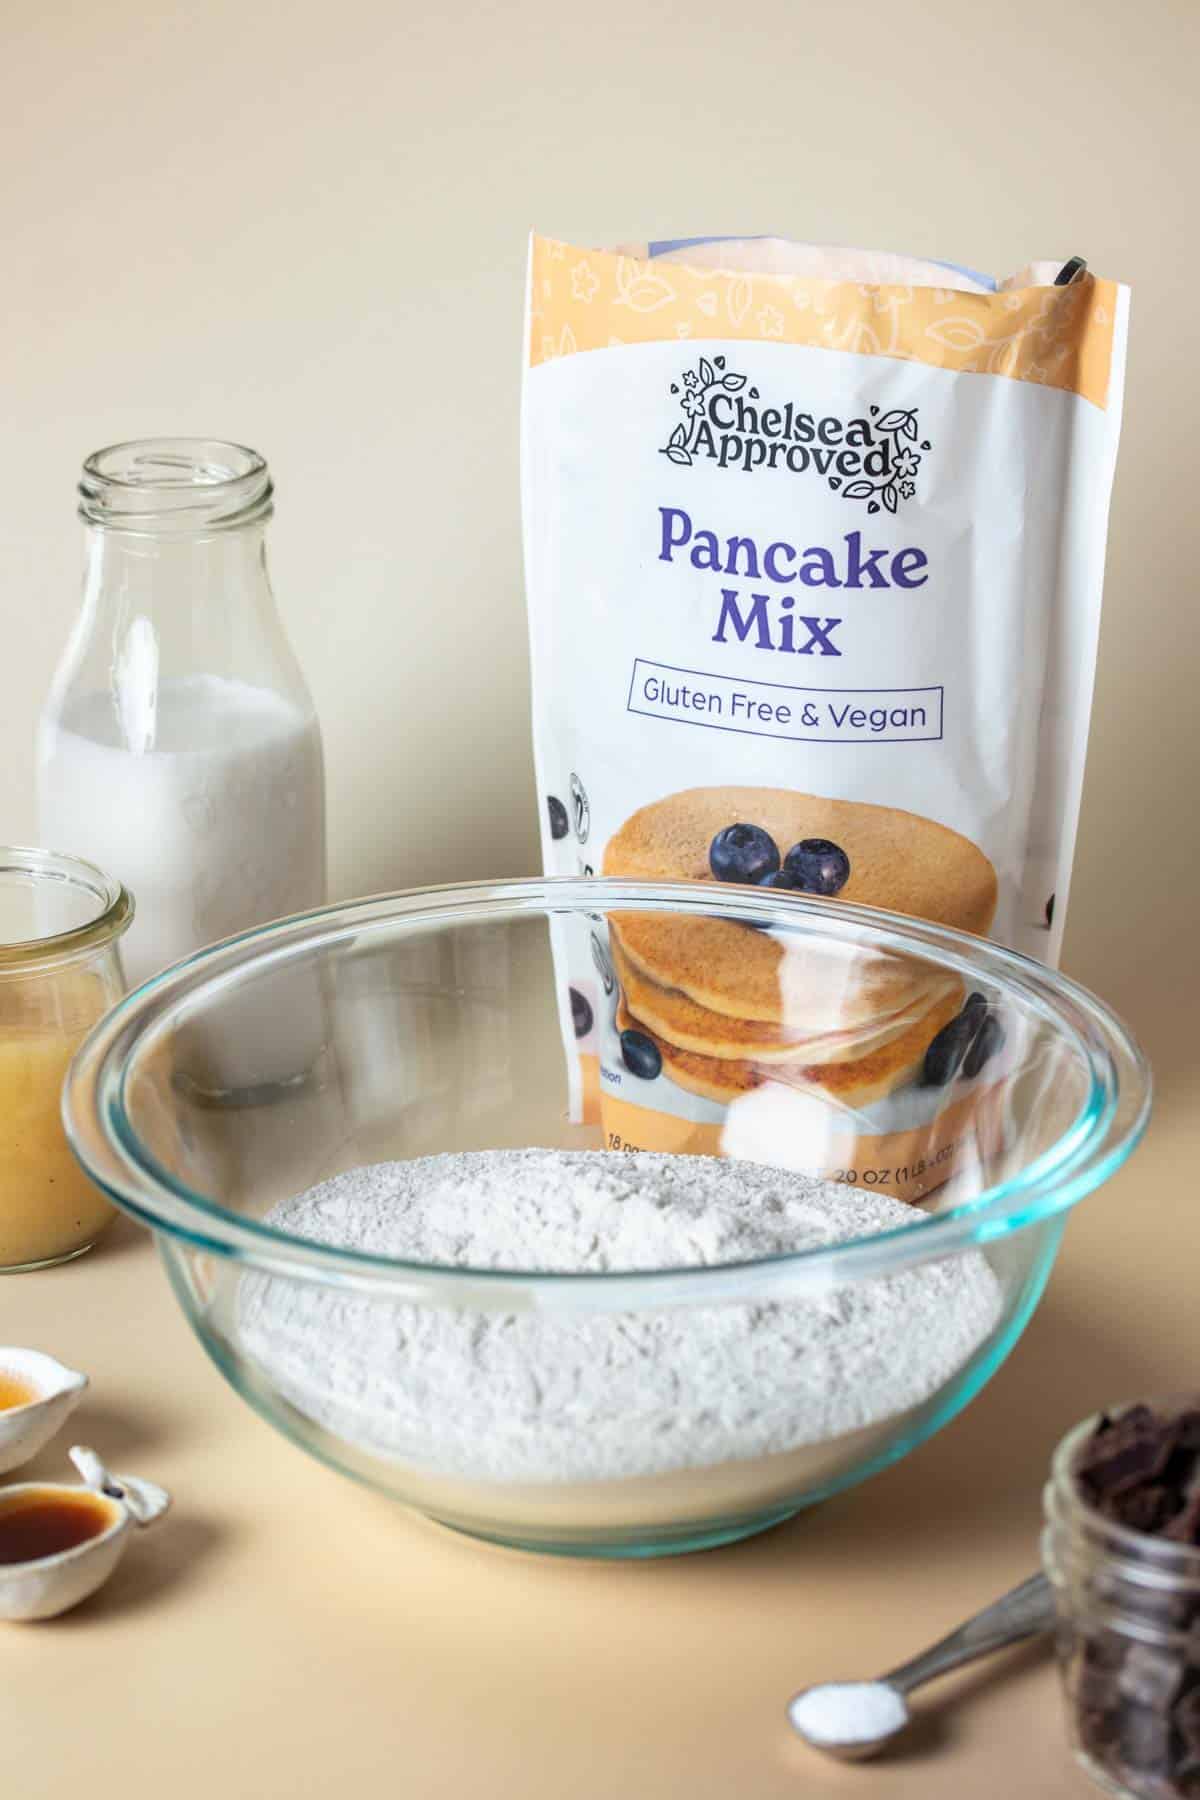 A glass bowl filled with flour in front of a bag of pancake mix surrounded by ingredients to make pancakes.